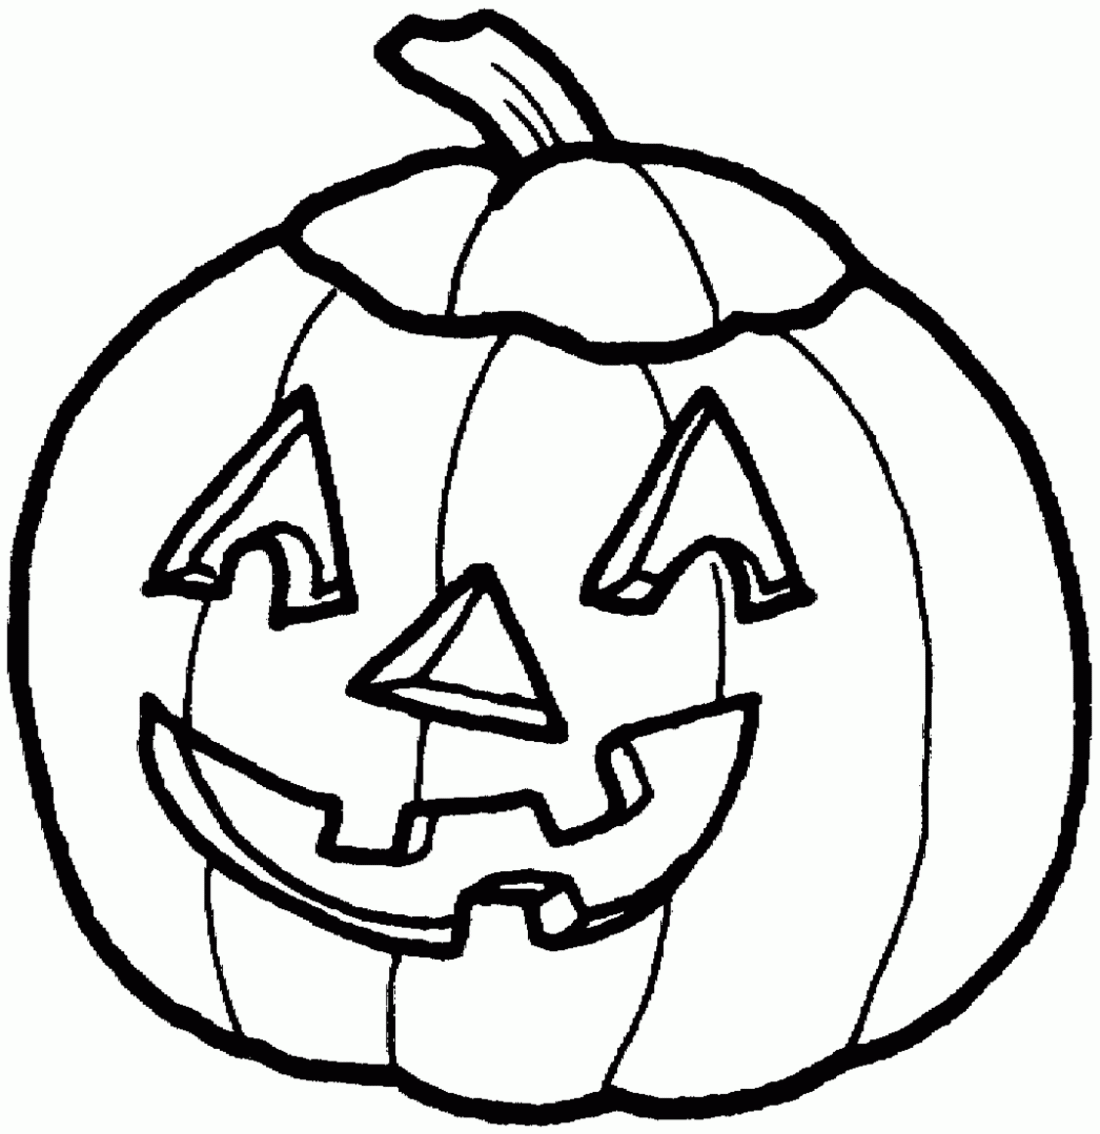 Free printable pumpkin coloring pages for kids halloween coloring pages printable pumpkin coloring pages pumpkin coloring sheet